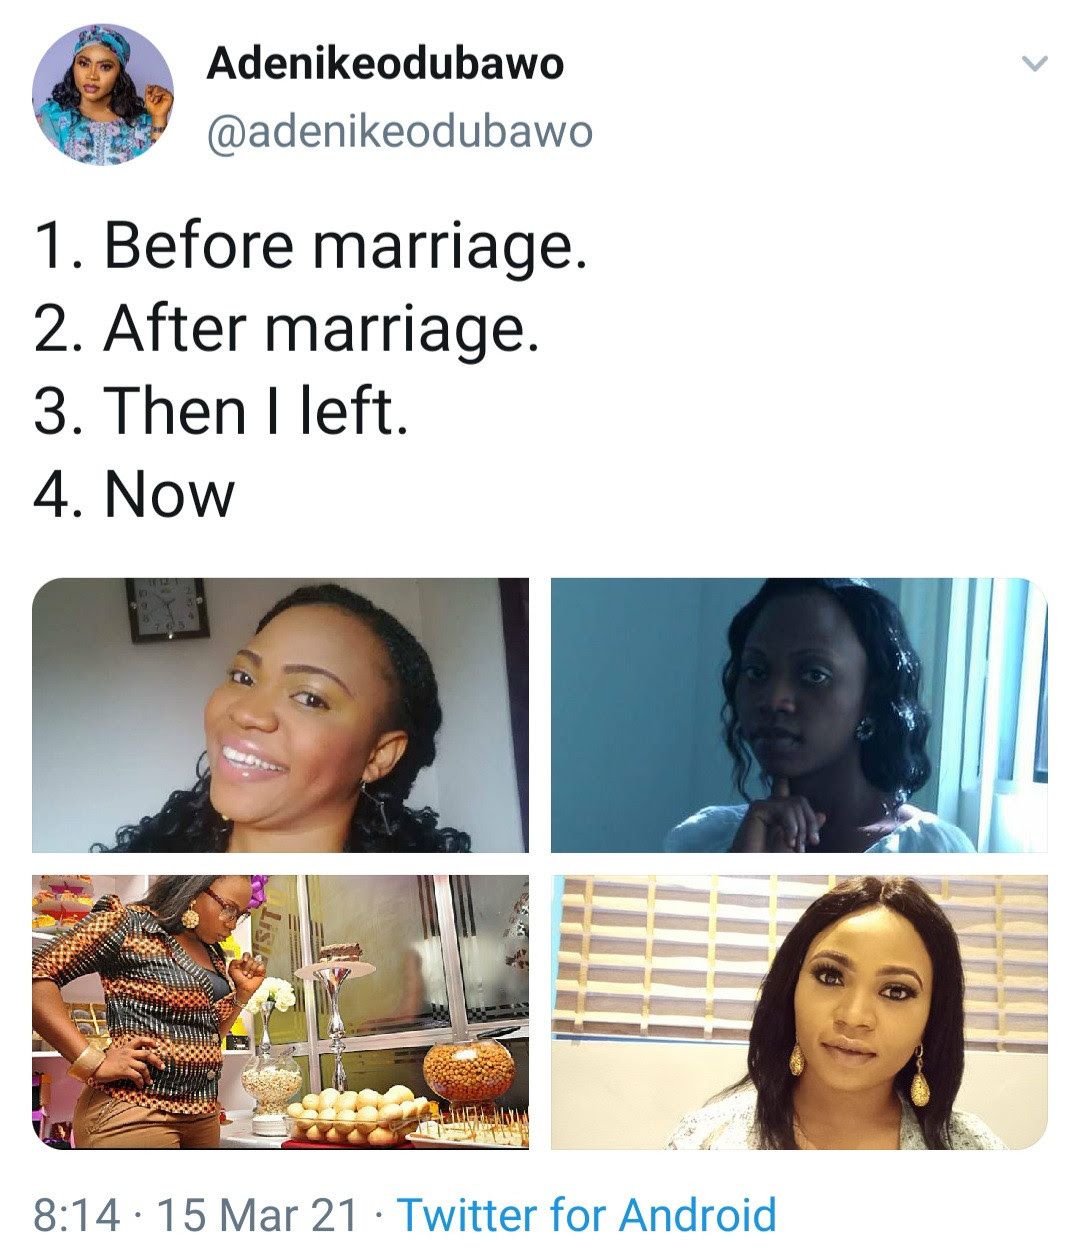 Woman shares photos of herself before, during, and after marriage to show the effect being married had on her